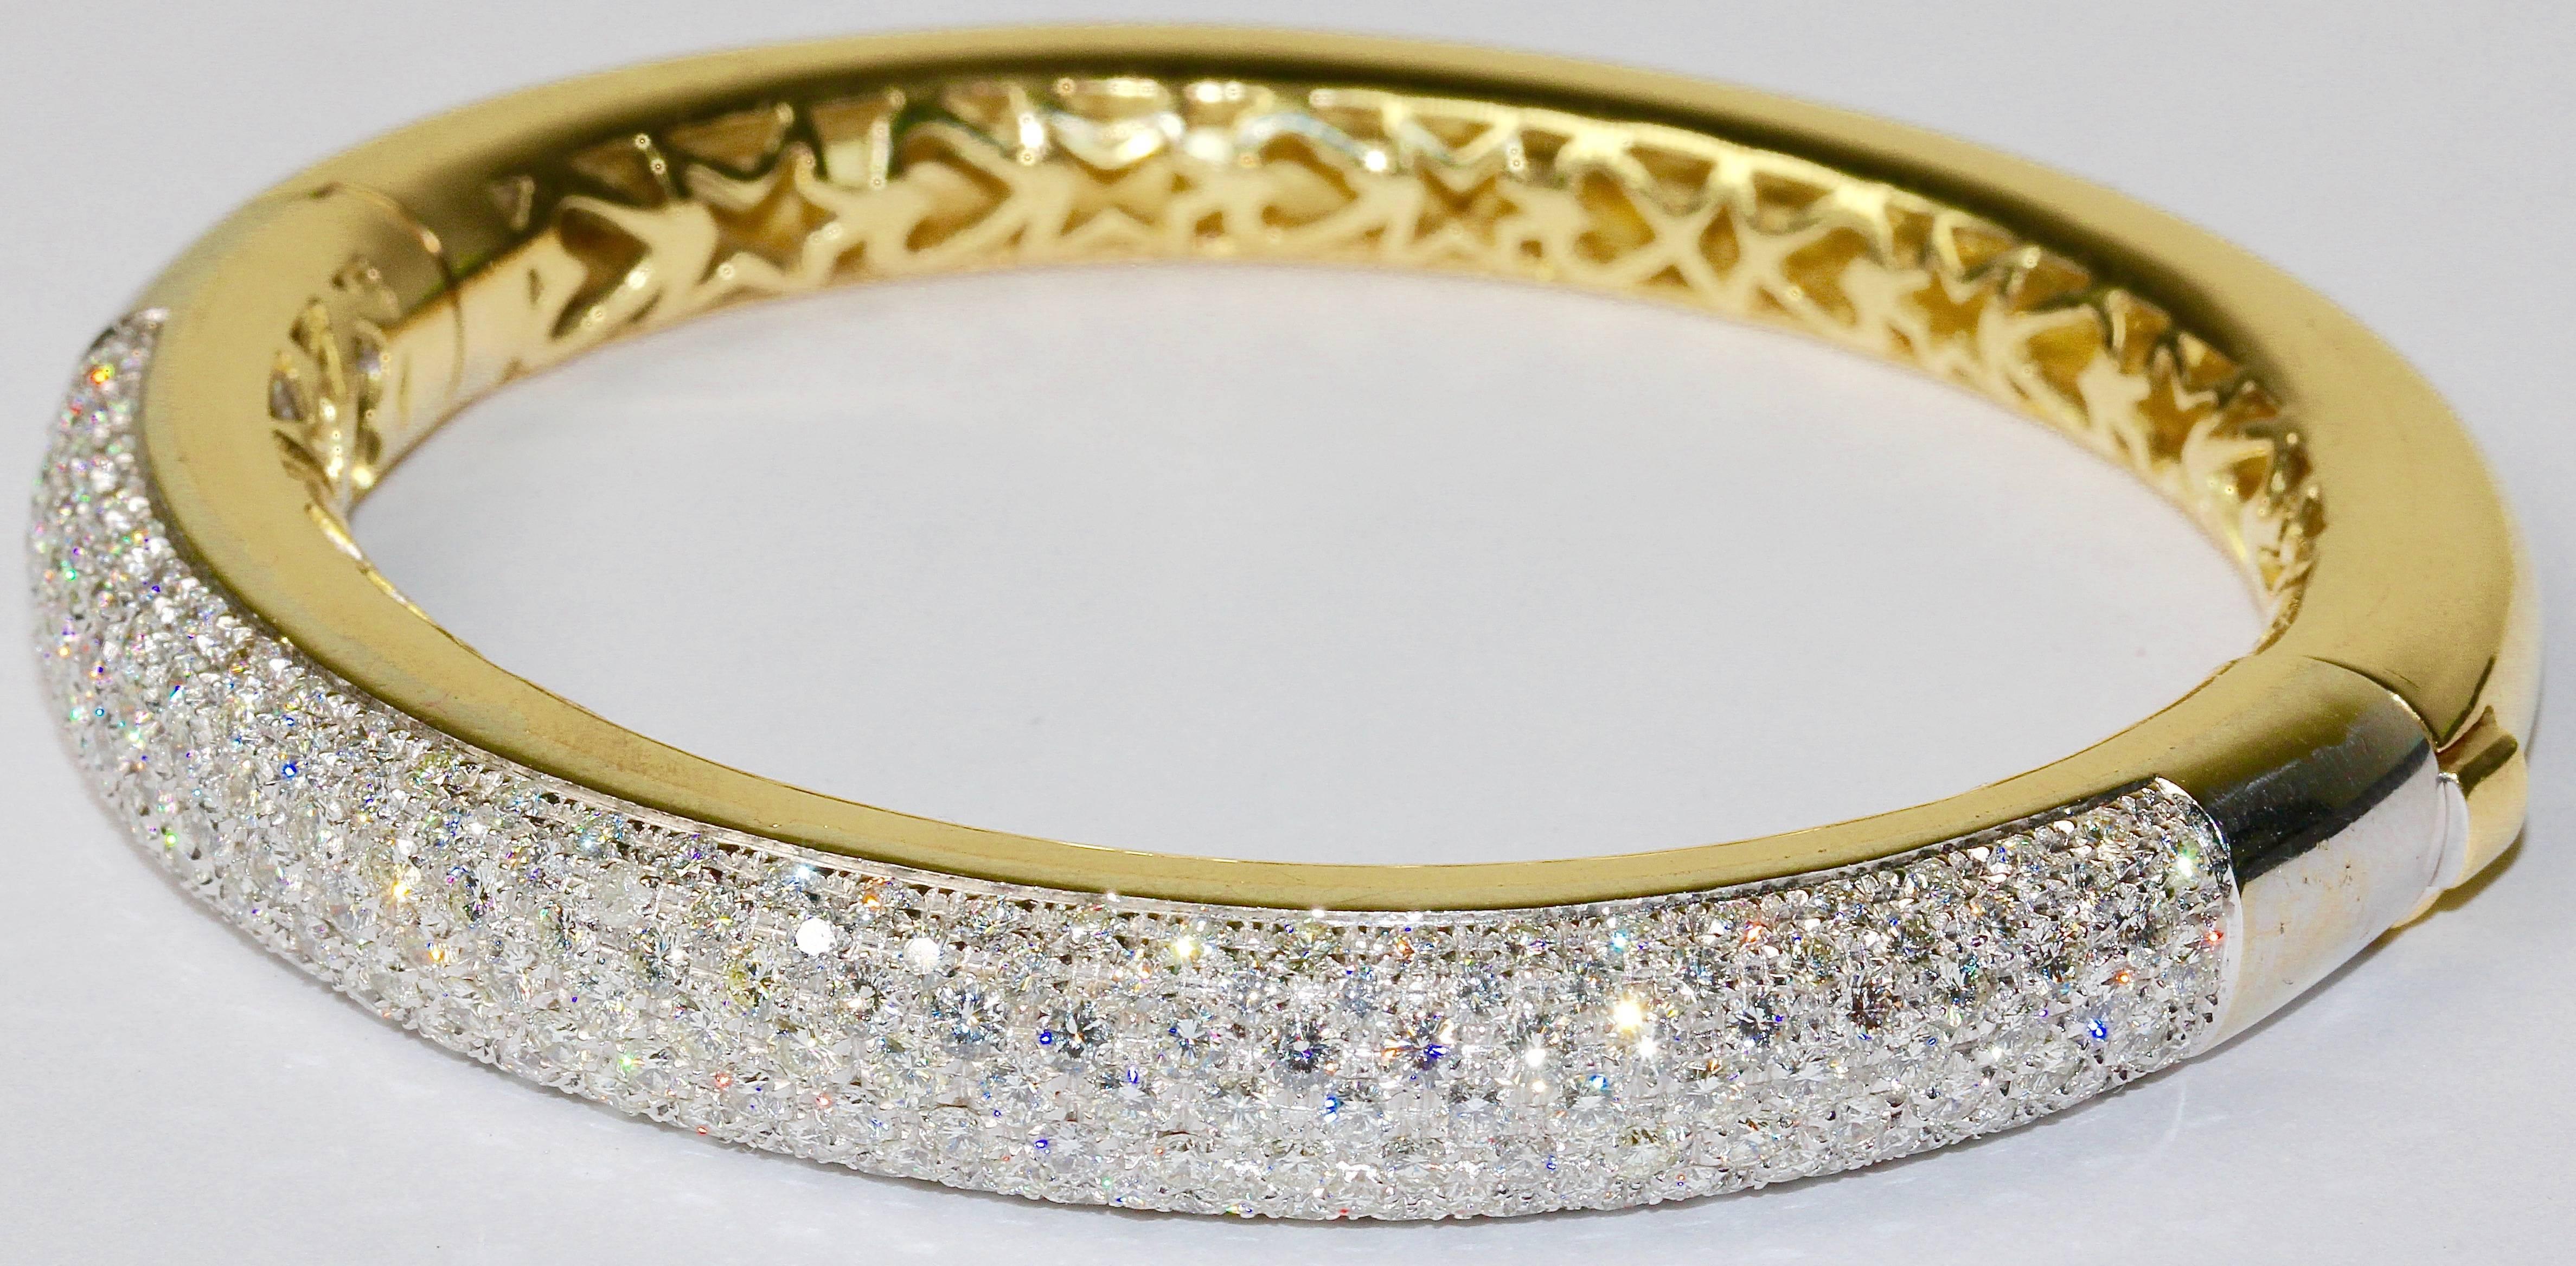 Round Cut Bangle, 18k Gold, 55.8 gram Set with 8.10ct Diamonds, with Certificate